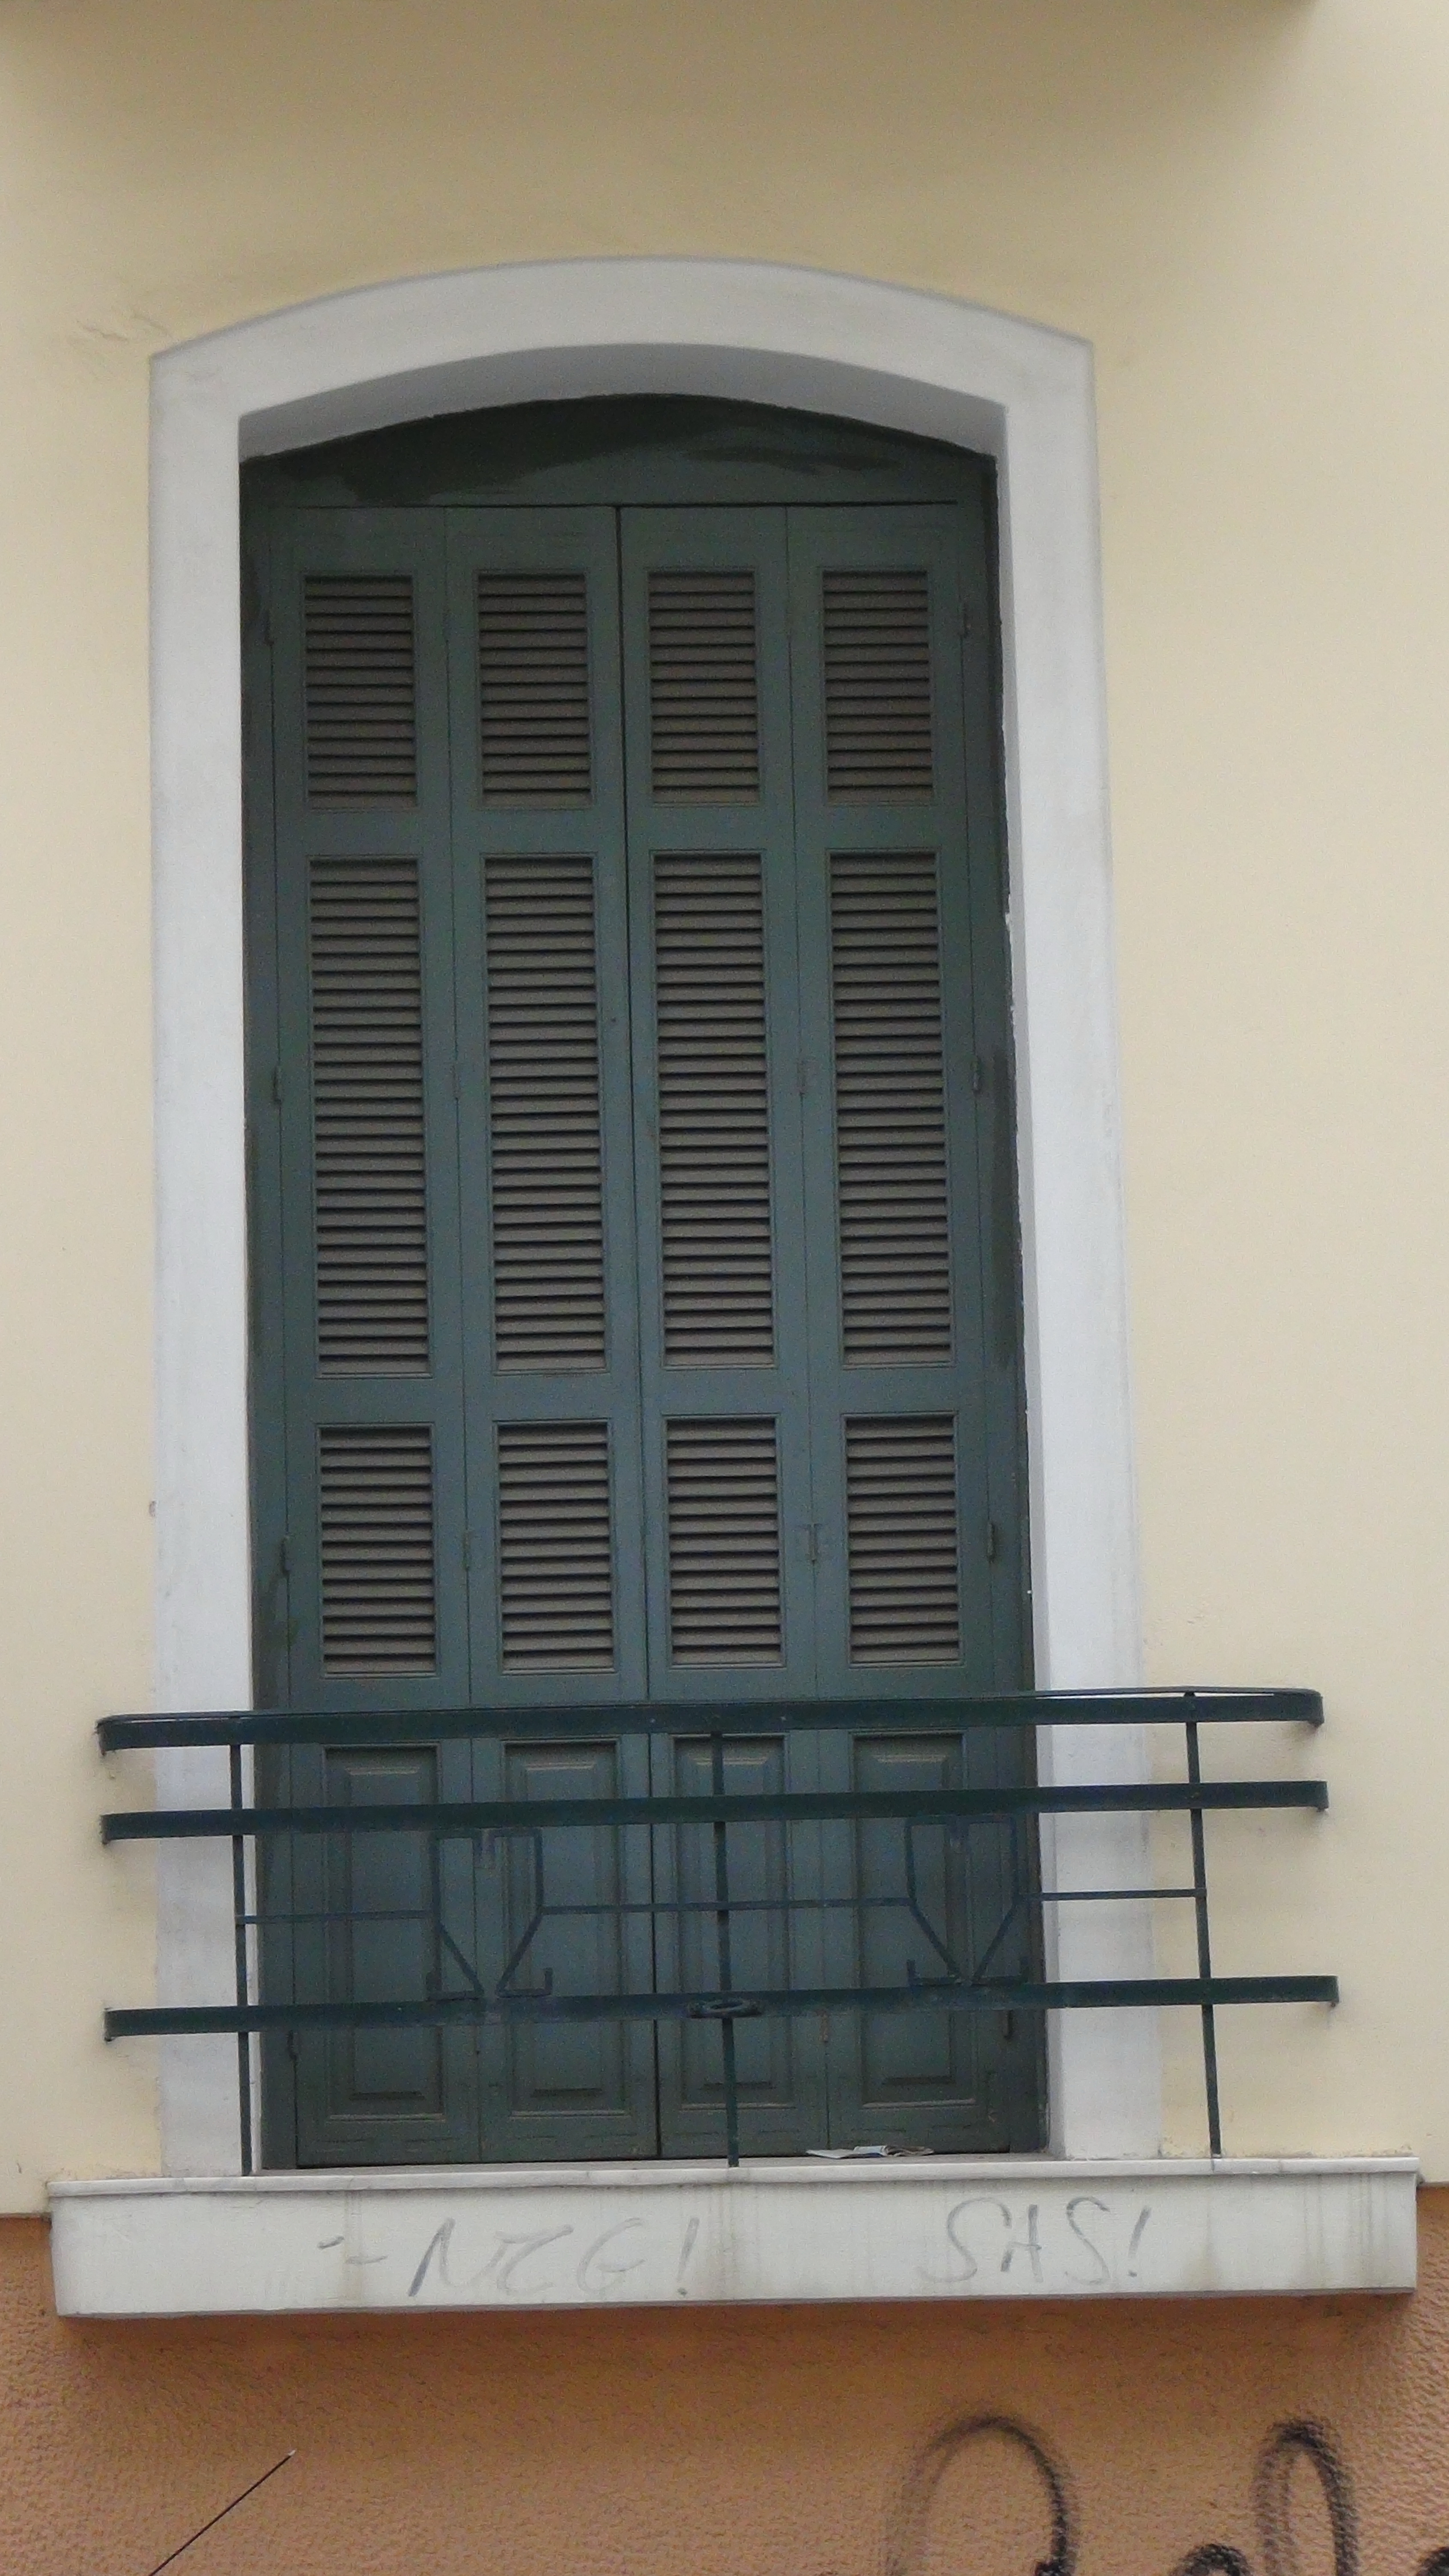 Balcony of the ground floor at the side of the building